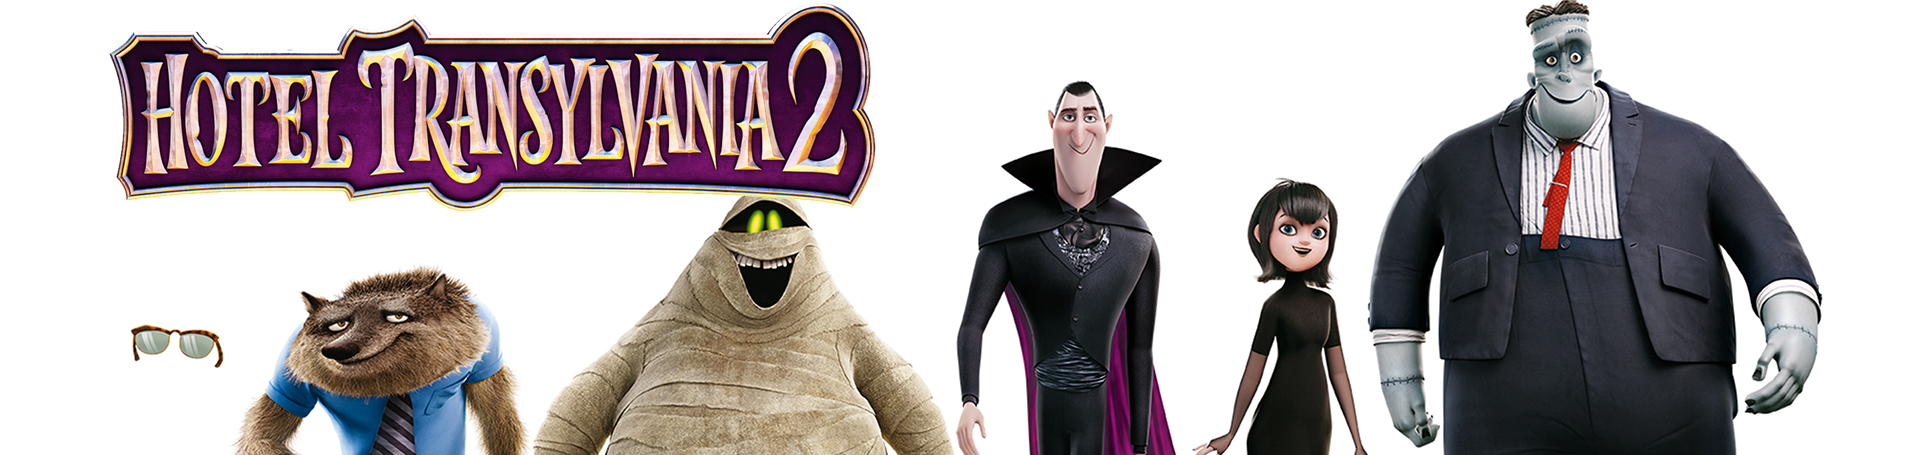 Get A Head Start On Your Roblox Halloween Costume With The Help Of Hotel Transylvania 2 Roblox Blog - roblox hotel transylvania 2